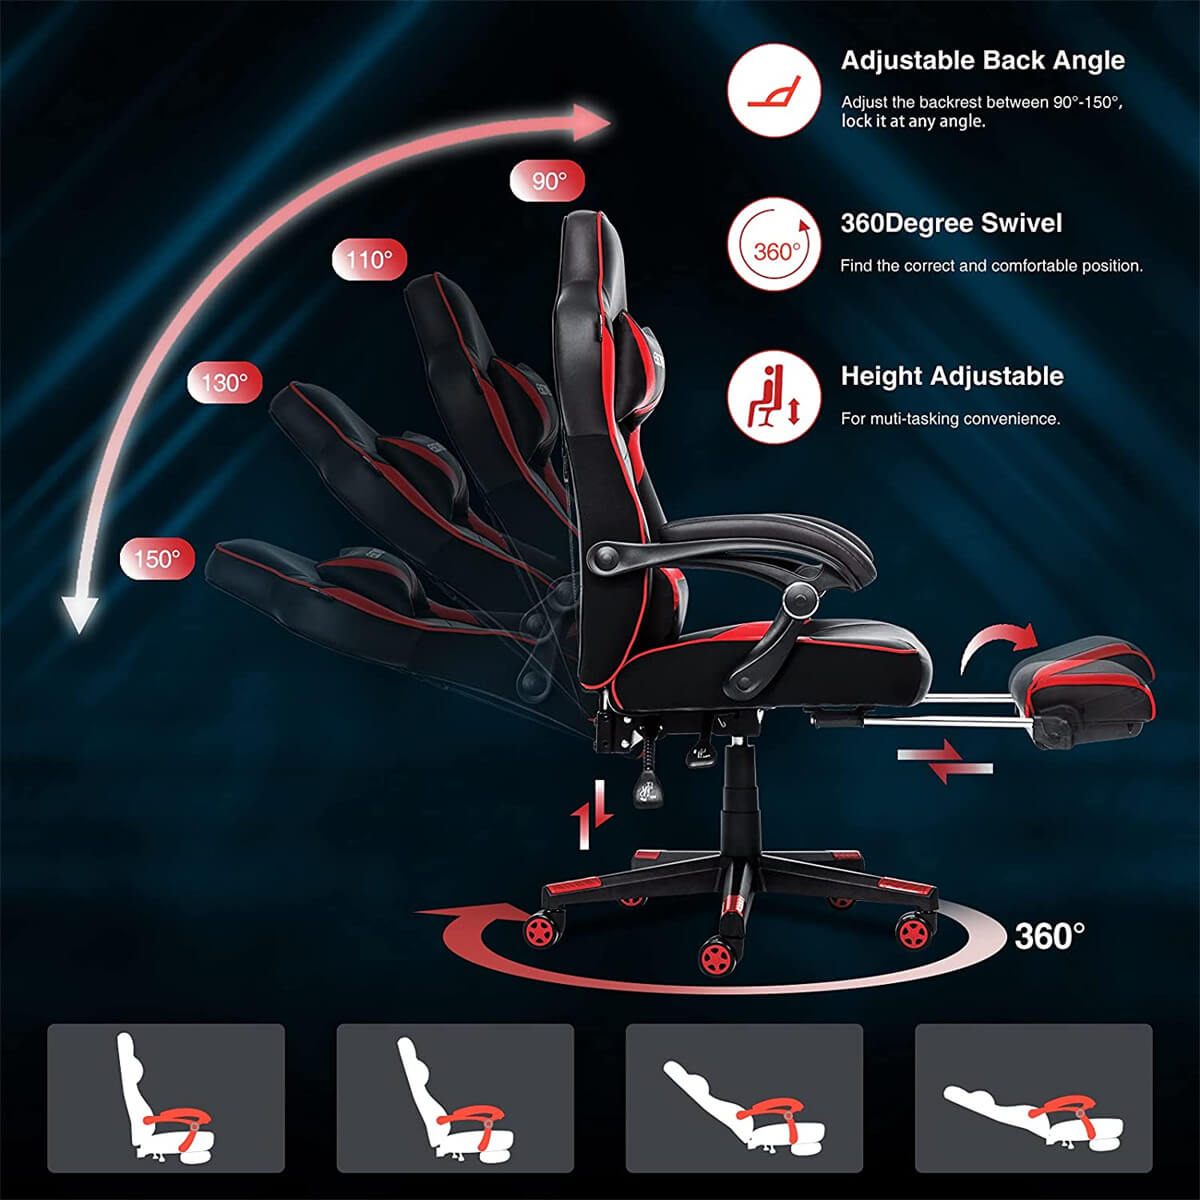 Elecwish Video Game Chairs Red Gaming Chair With Footrest OC087 can adjustback angle, height and have 360 degree swivel